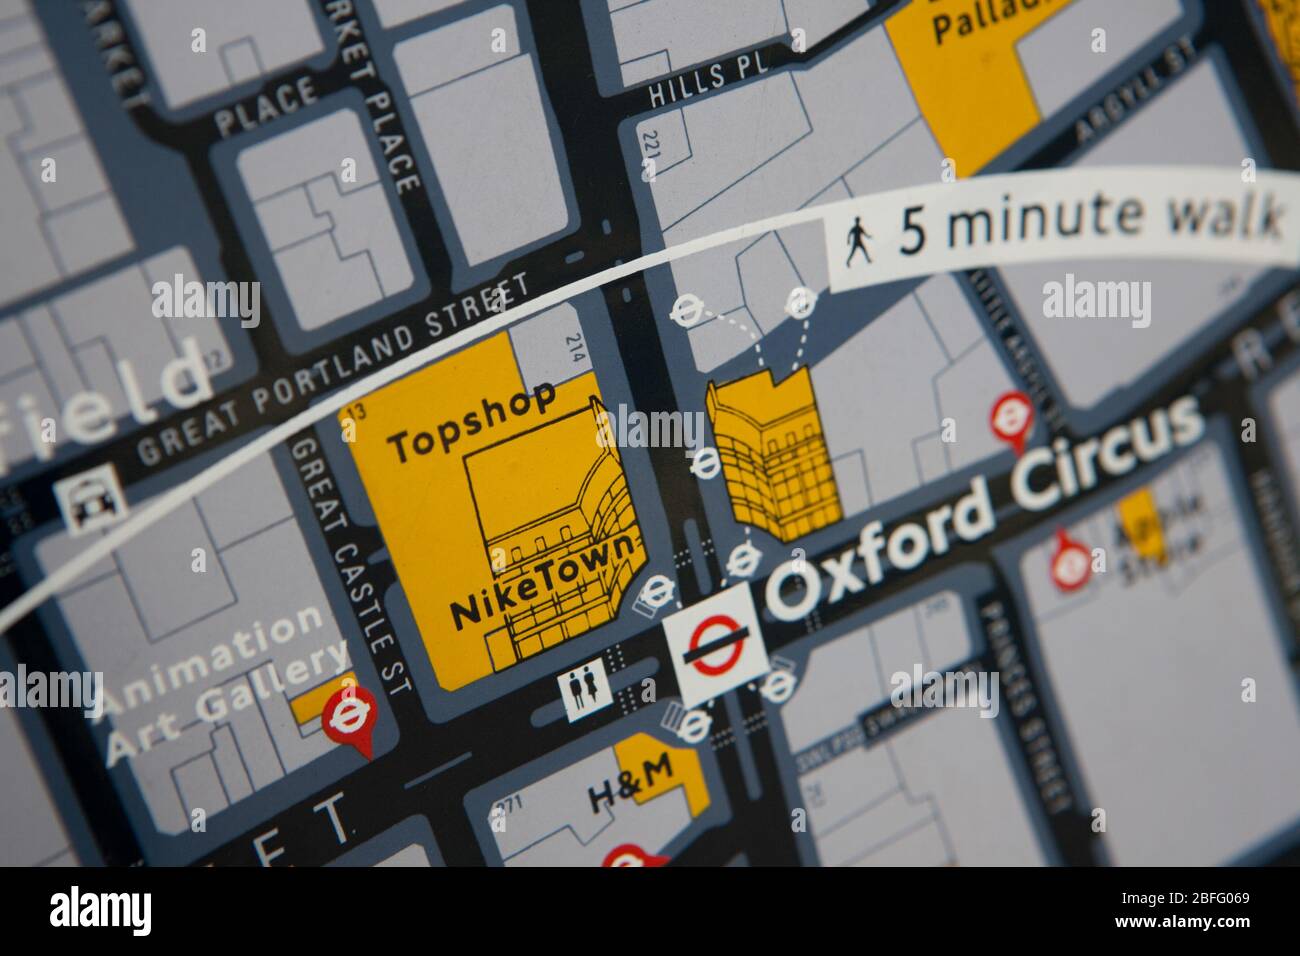 Central London map showing the Topshop and Nike Town stores Stock Photo -  Alamy